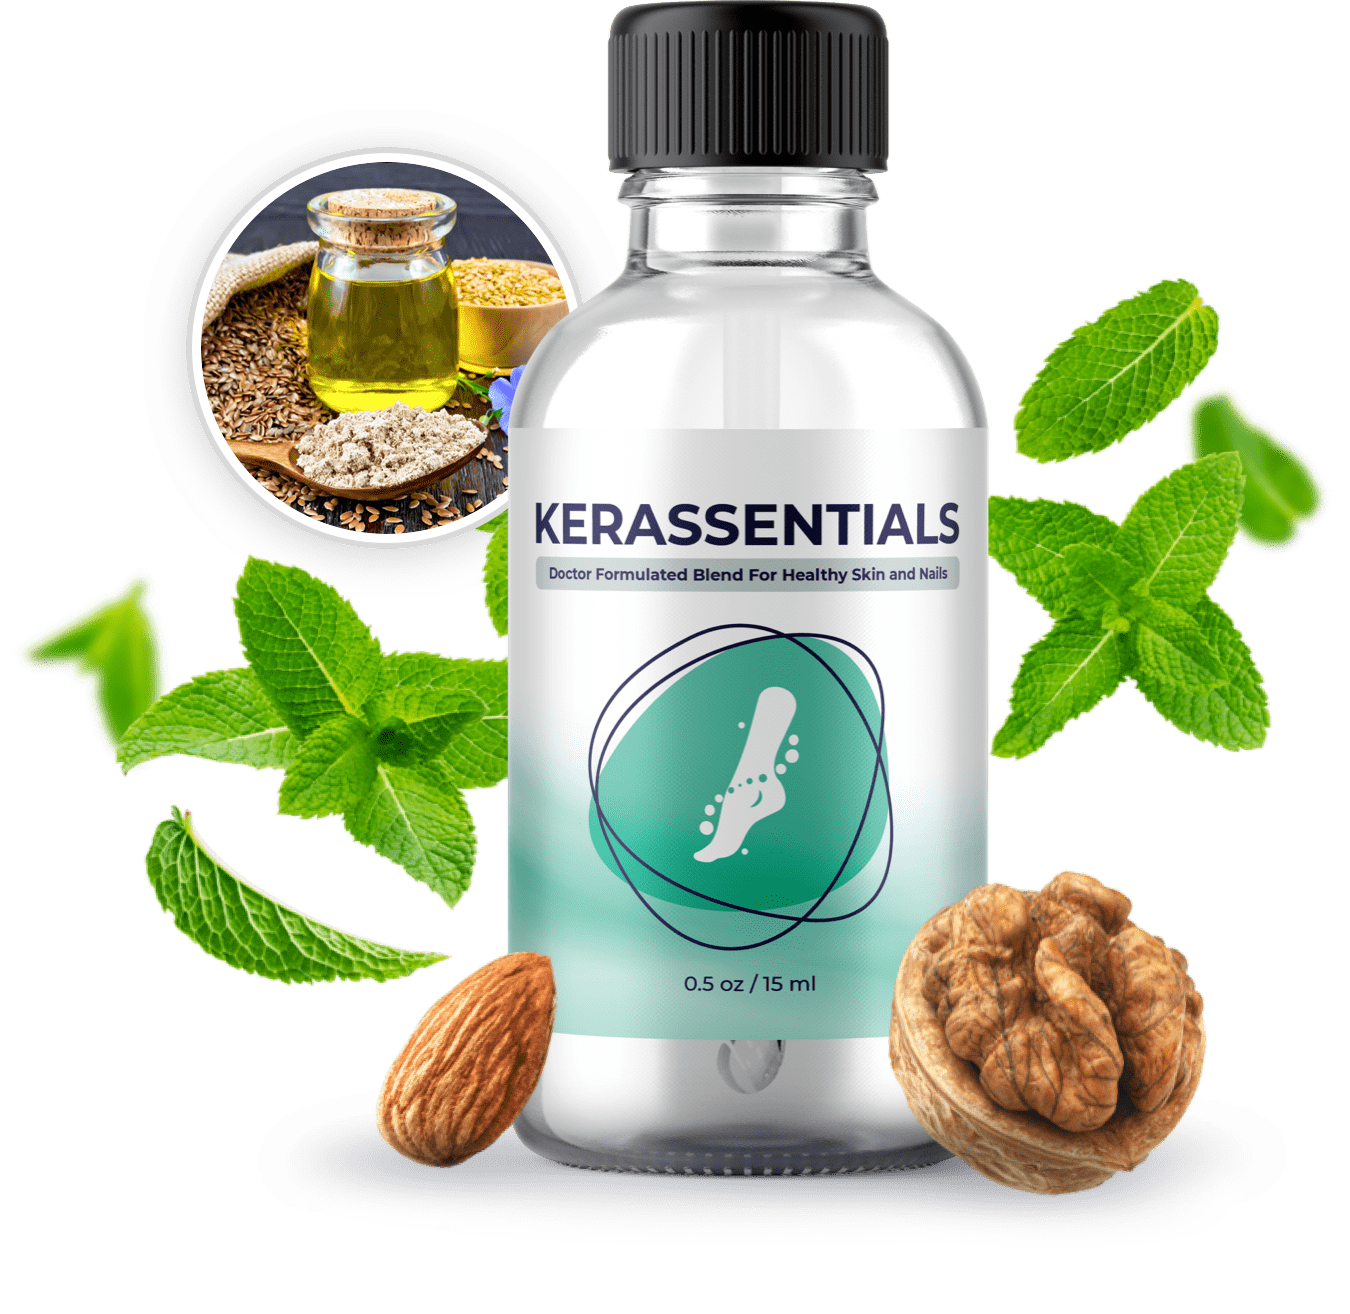 Kerassentials: Nourishing, anti-fungal solution for healthy skin and nails